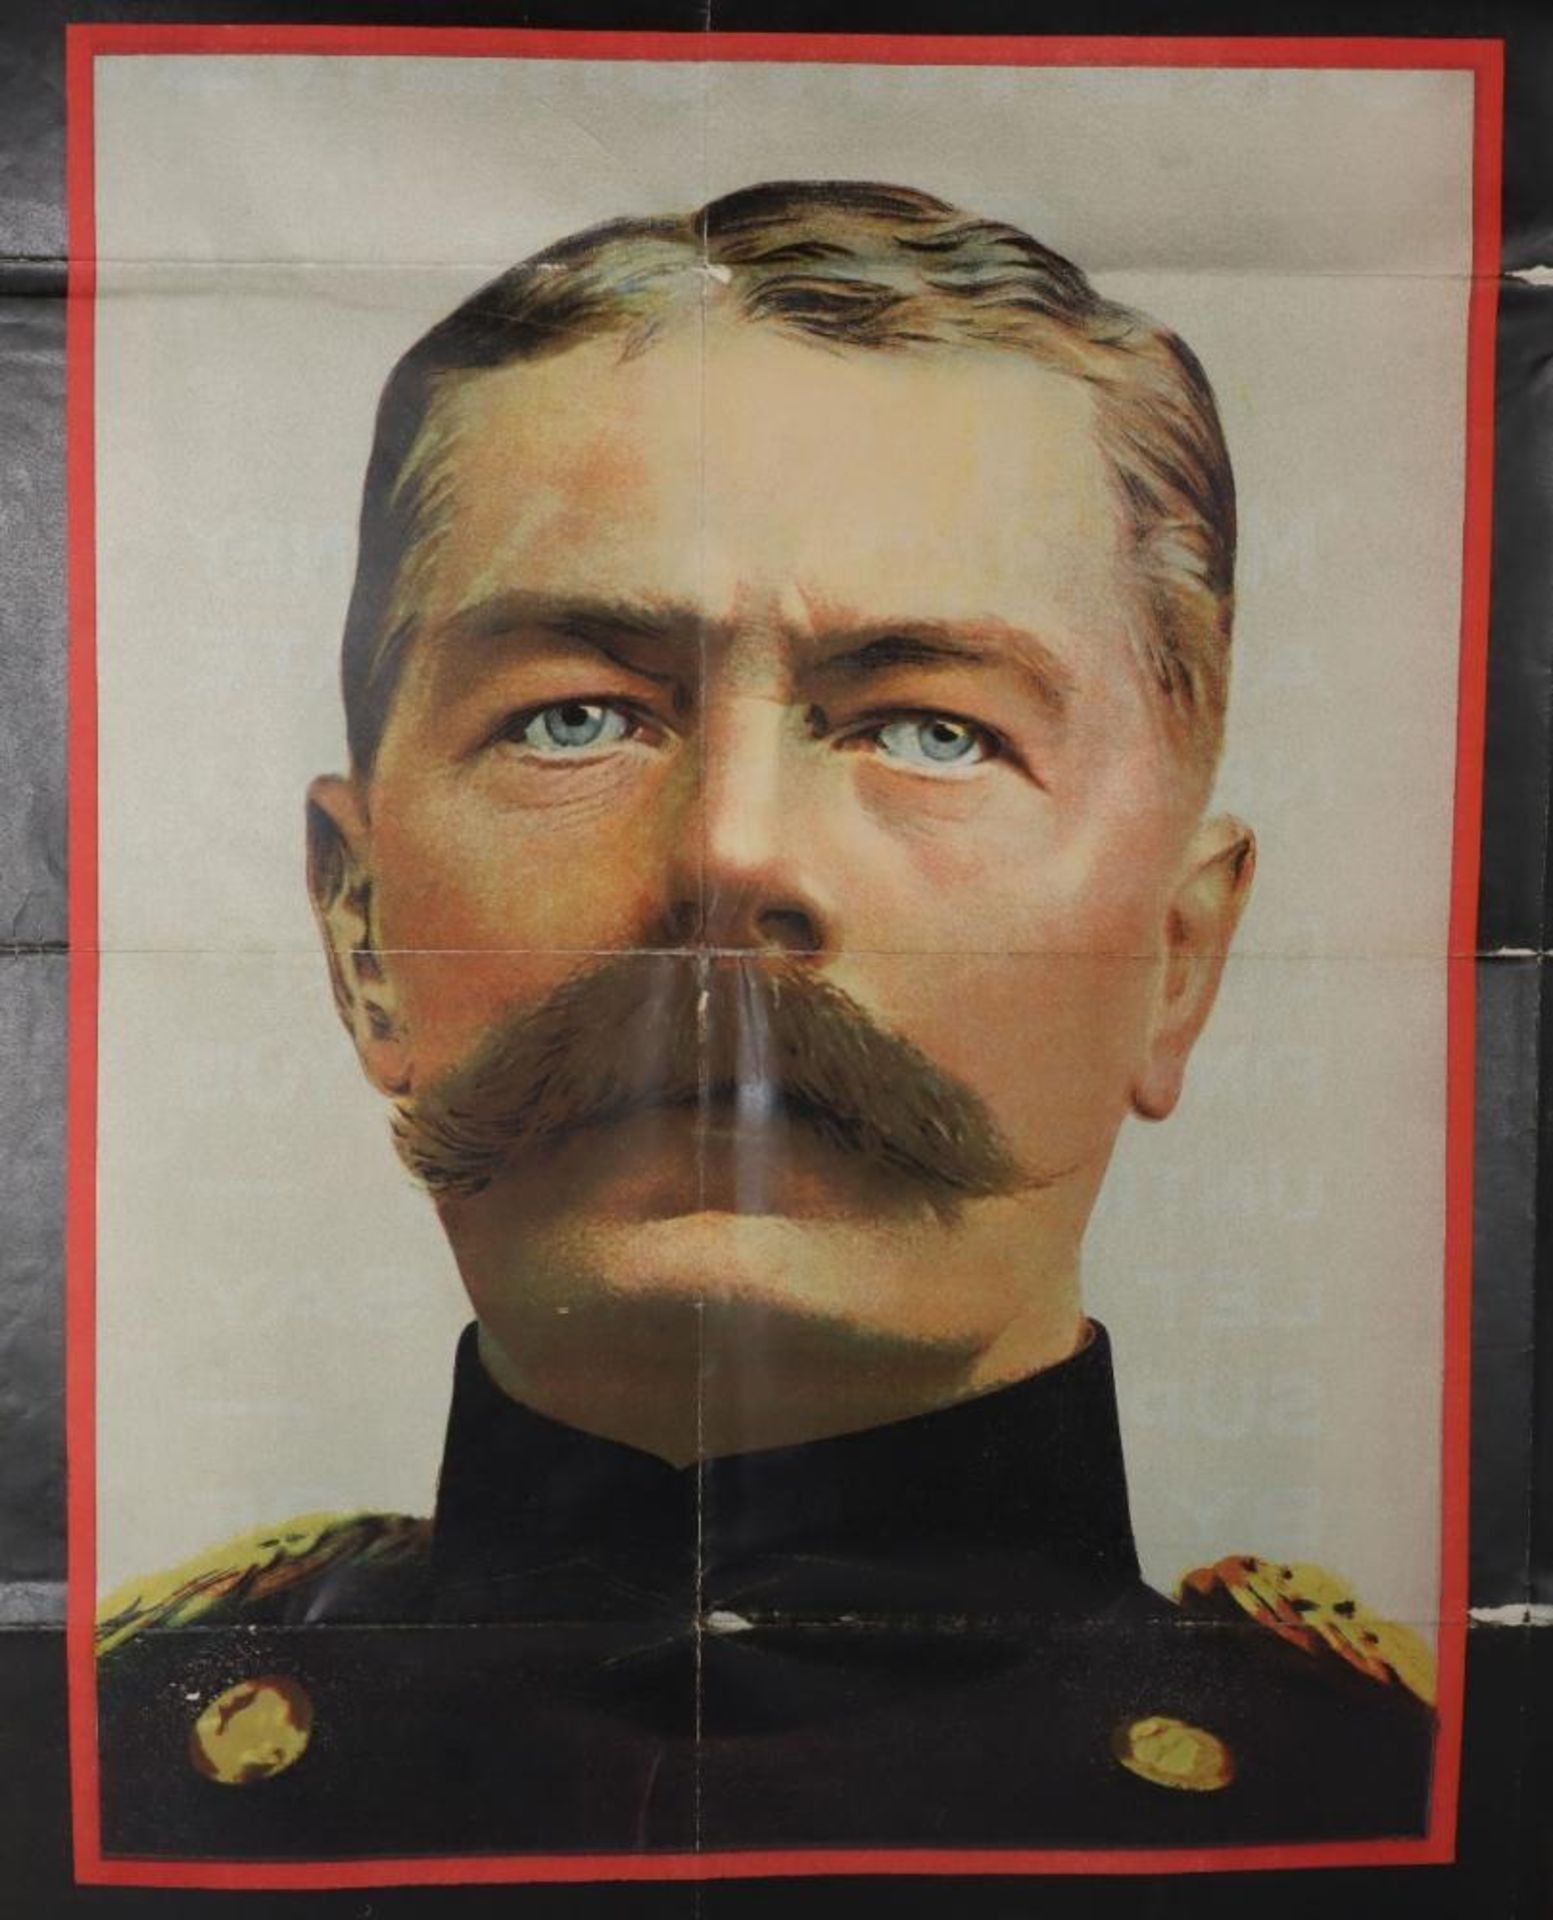 WW1 British Recruiting Poster, "Lord Kitchener Says .. Enlist To-Day" - Image 2 of 4